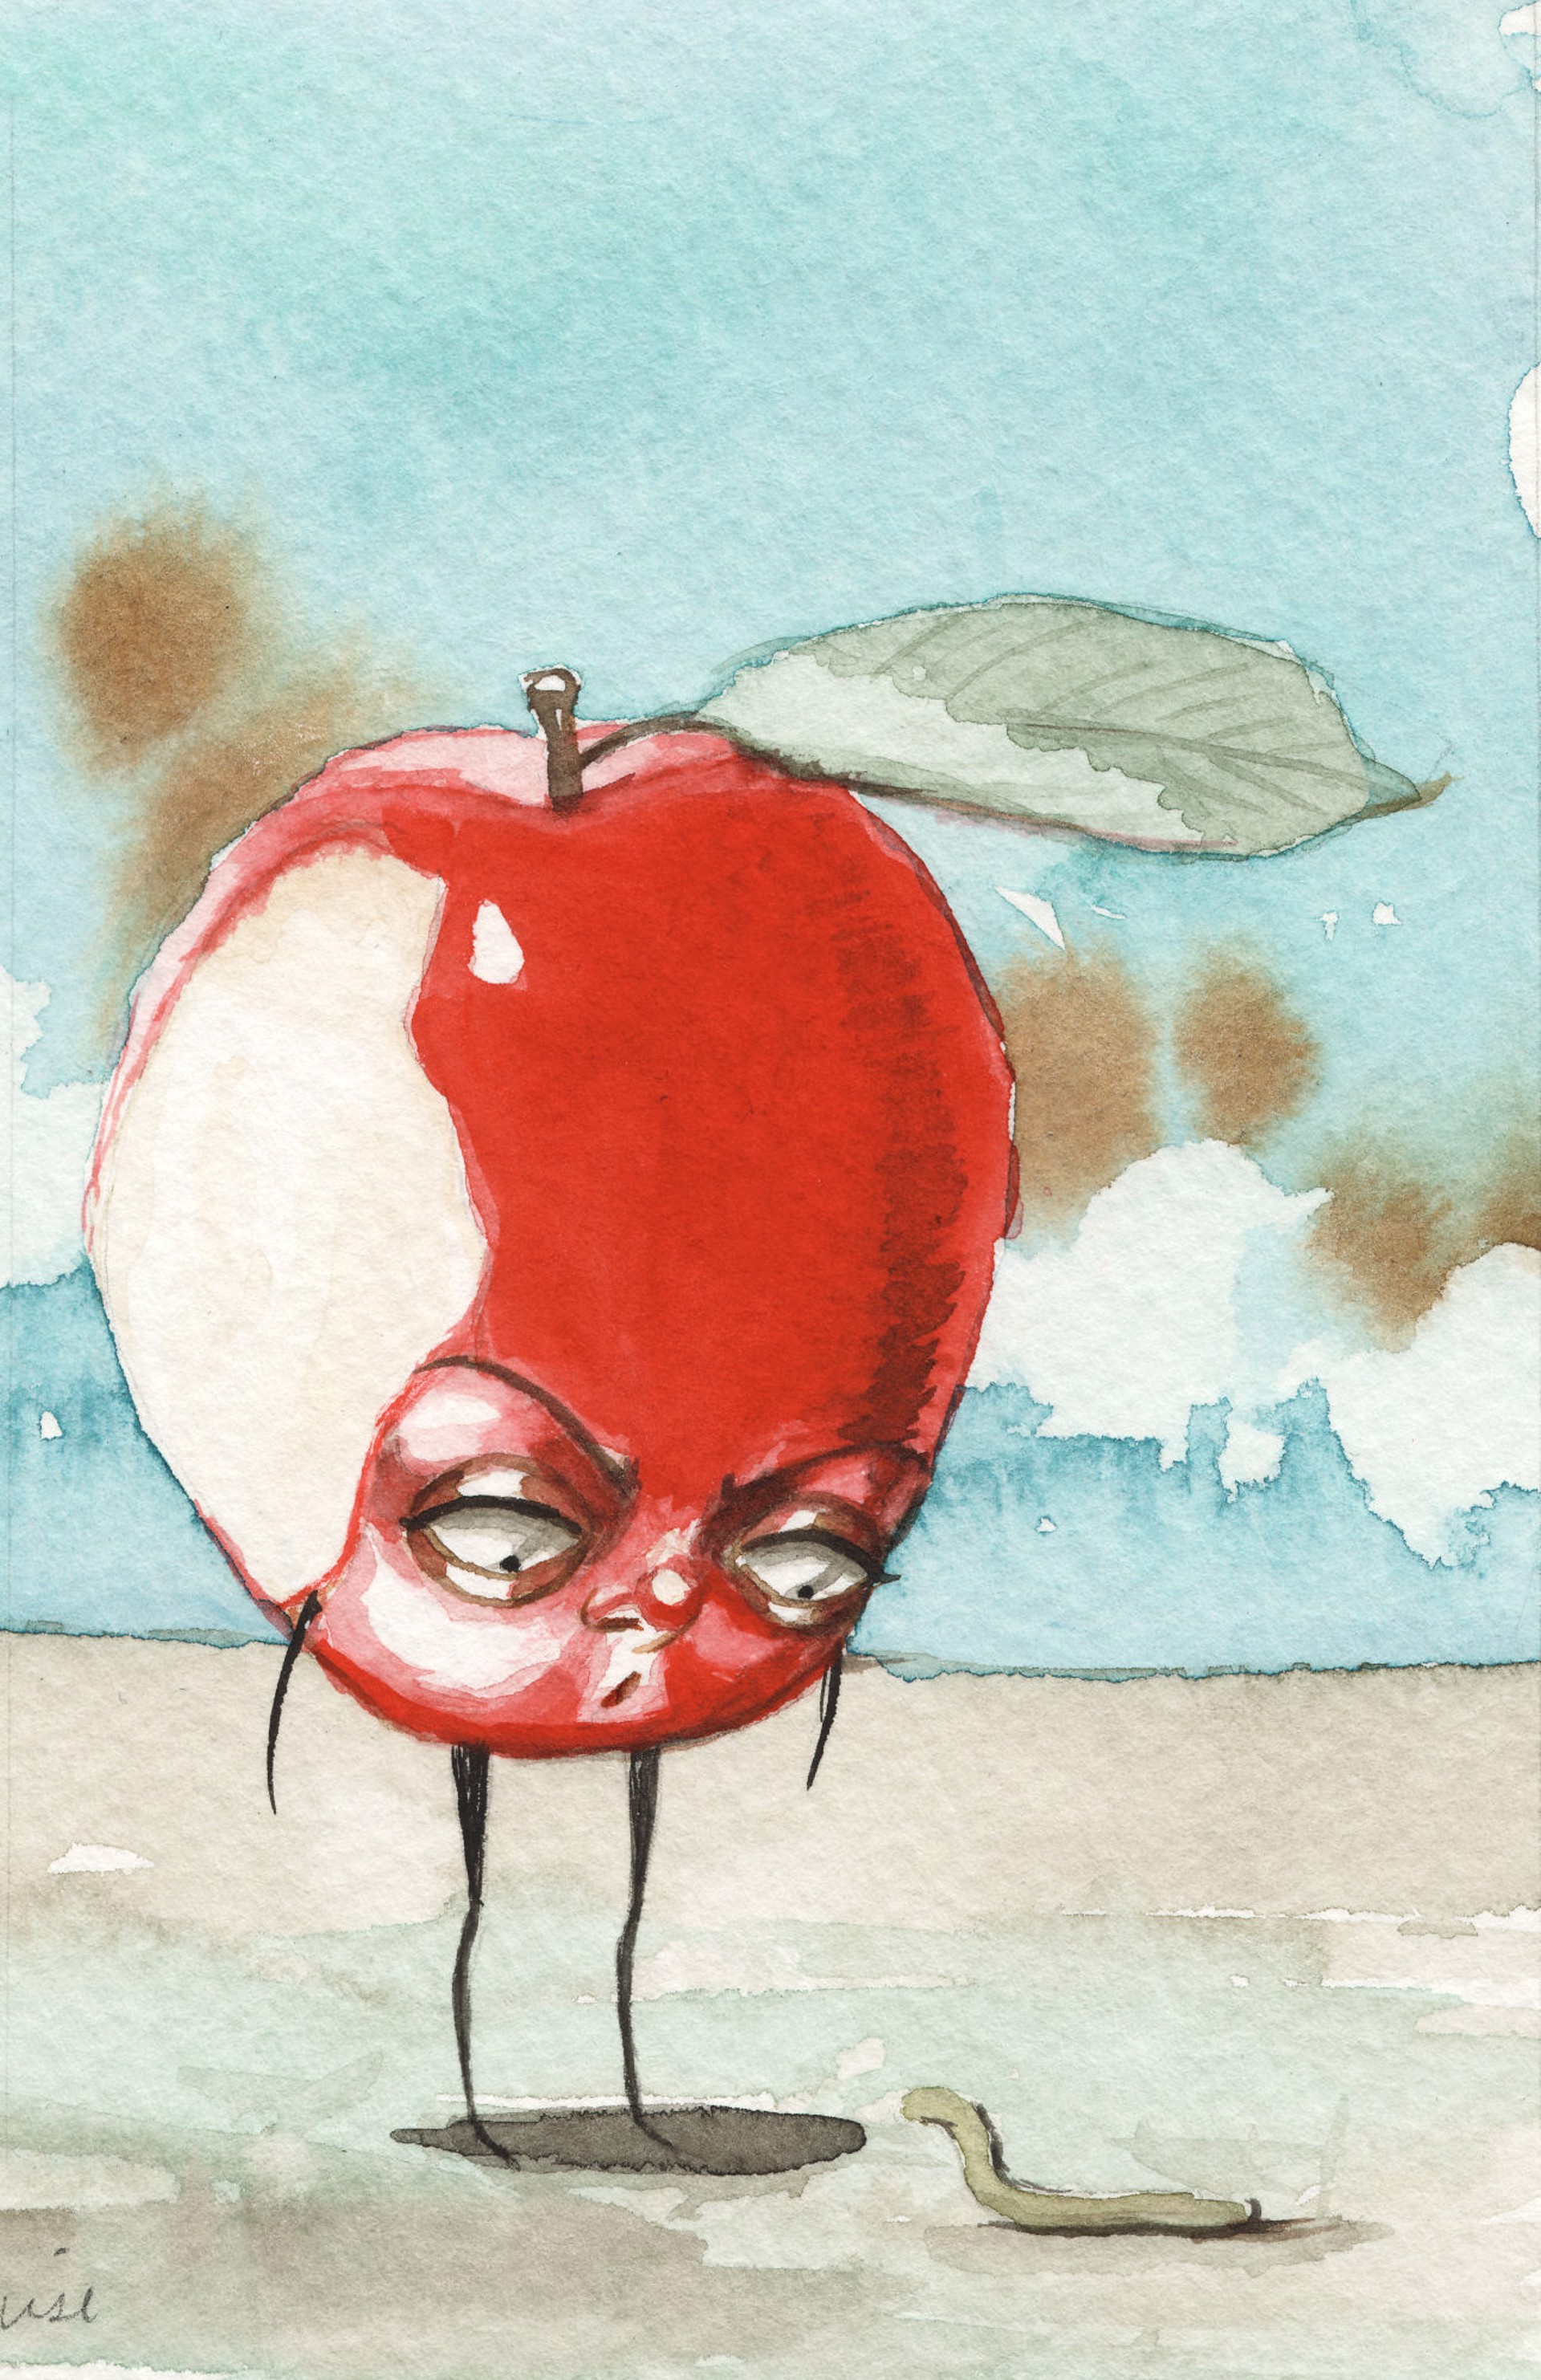 Apple of Fury (Giclee on Deckled Paper) G.O. by Liese Chavez